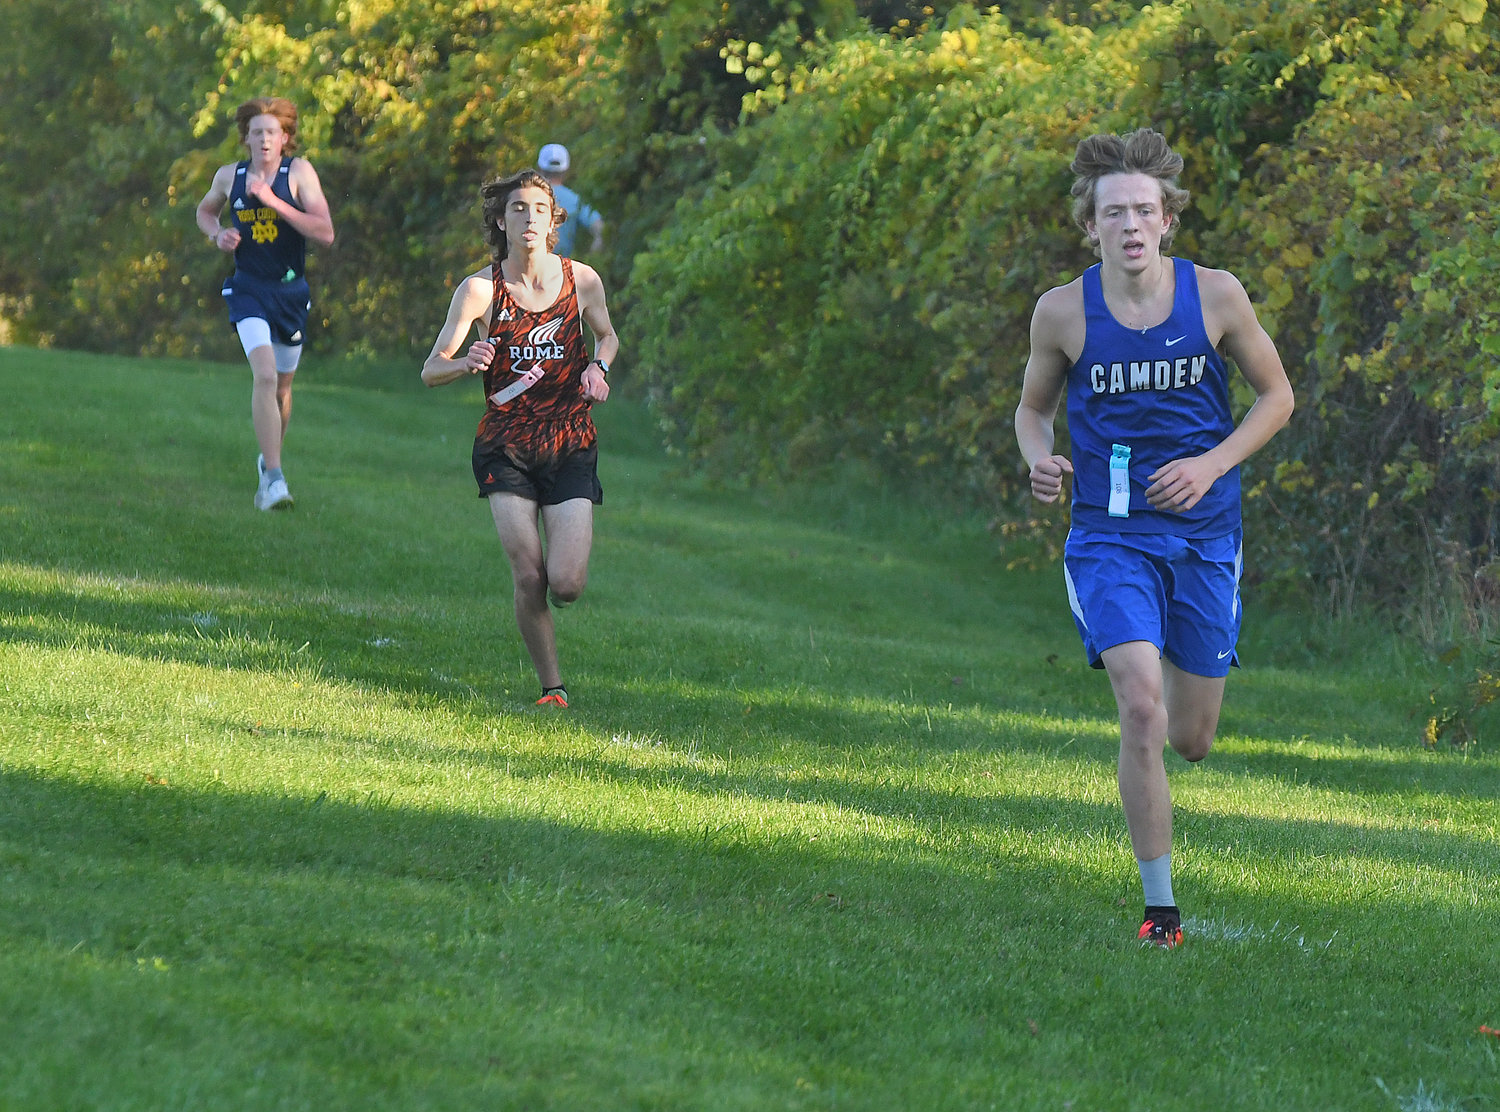 Camden’s Jerome Seidl leads Rome Free Academy’s Carson Campbell at the start of the second lap of Tuesday’s cross country race at RFA. Seidl went on to get the win the race in 18:58.21, with Campbell in second place. RFA defeated both Camden and Utica-Notre Dame in team points.